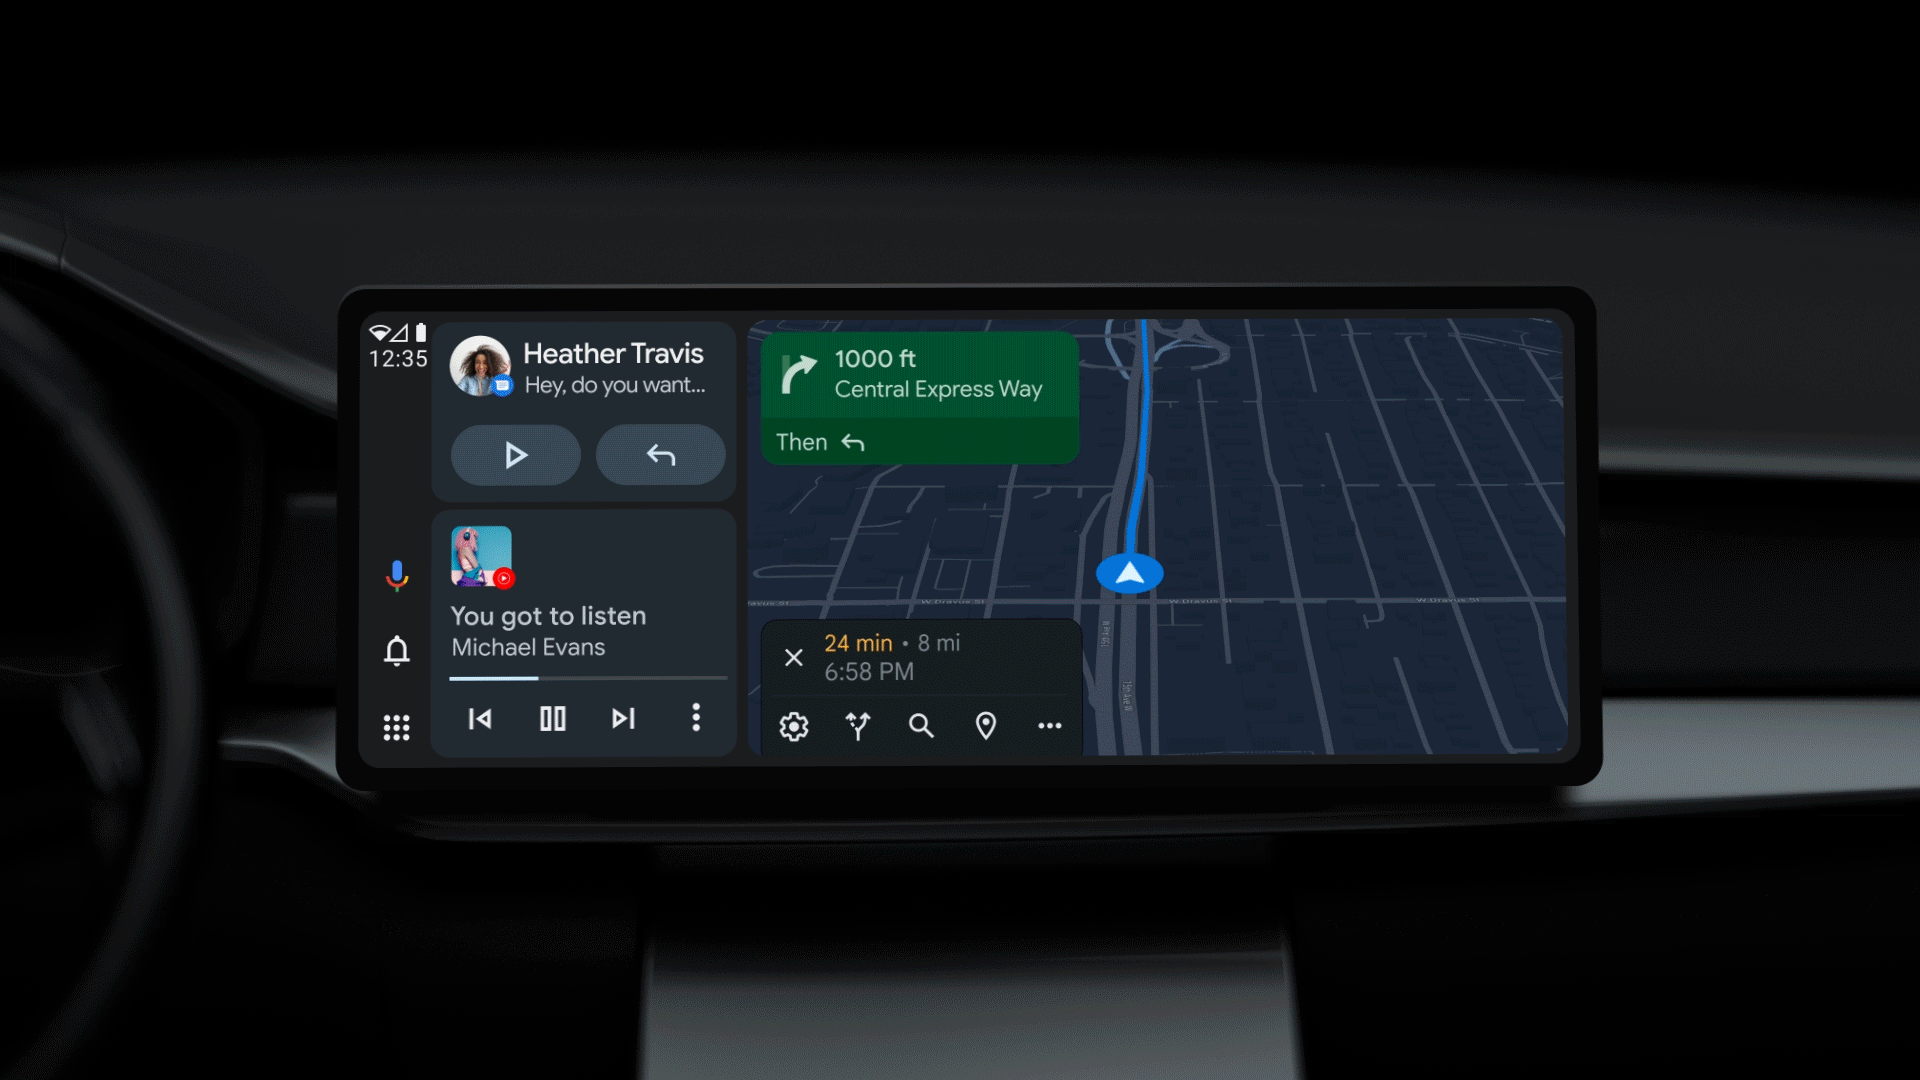 Android Auto's new dynamic UI adapts the split-screen experience to any screen type.